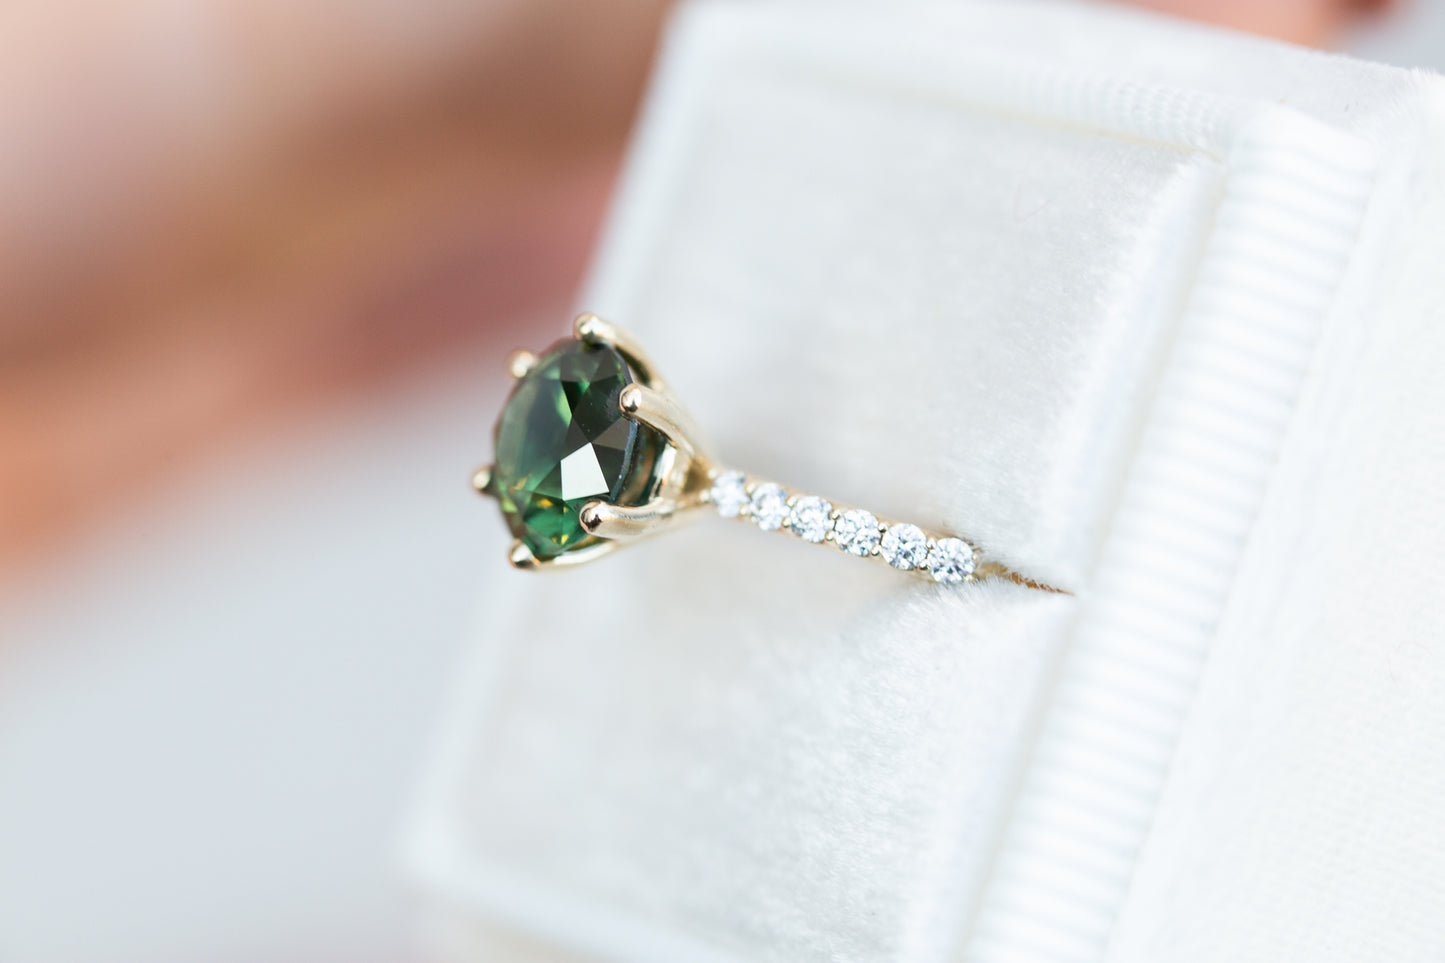 The Arya with green sapphire